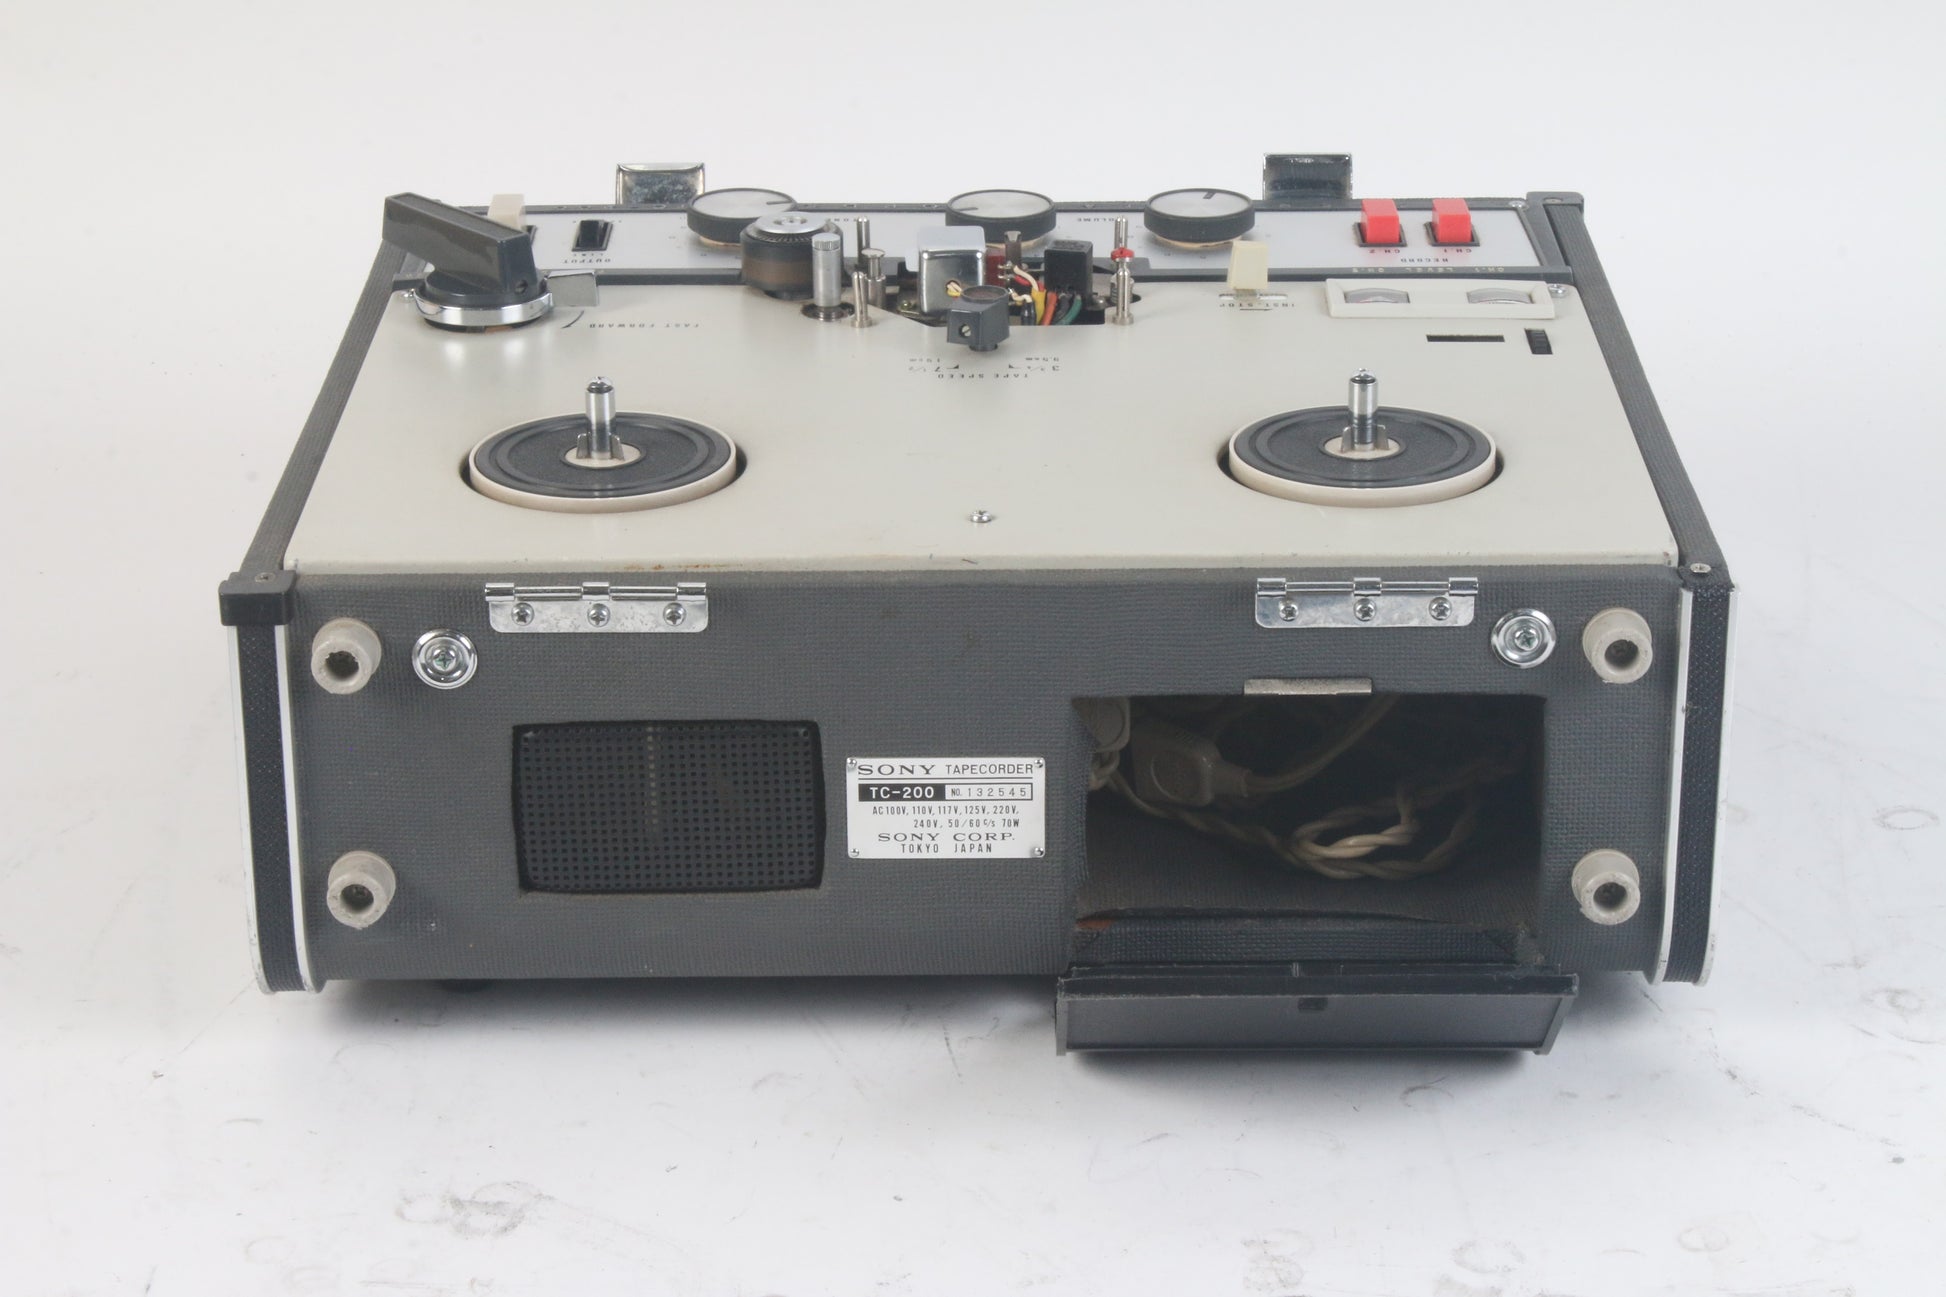 Sony TC-200 Vintage Stereo Reel to Reel Tape Recorder - AS IS Parts or